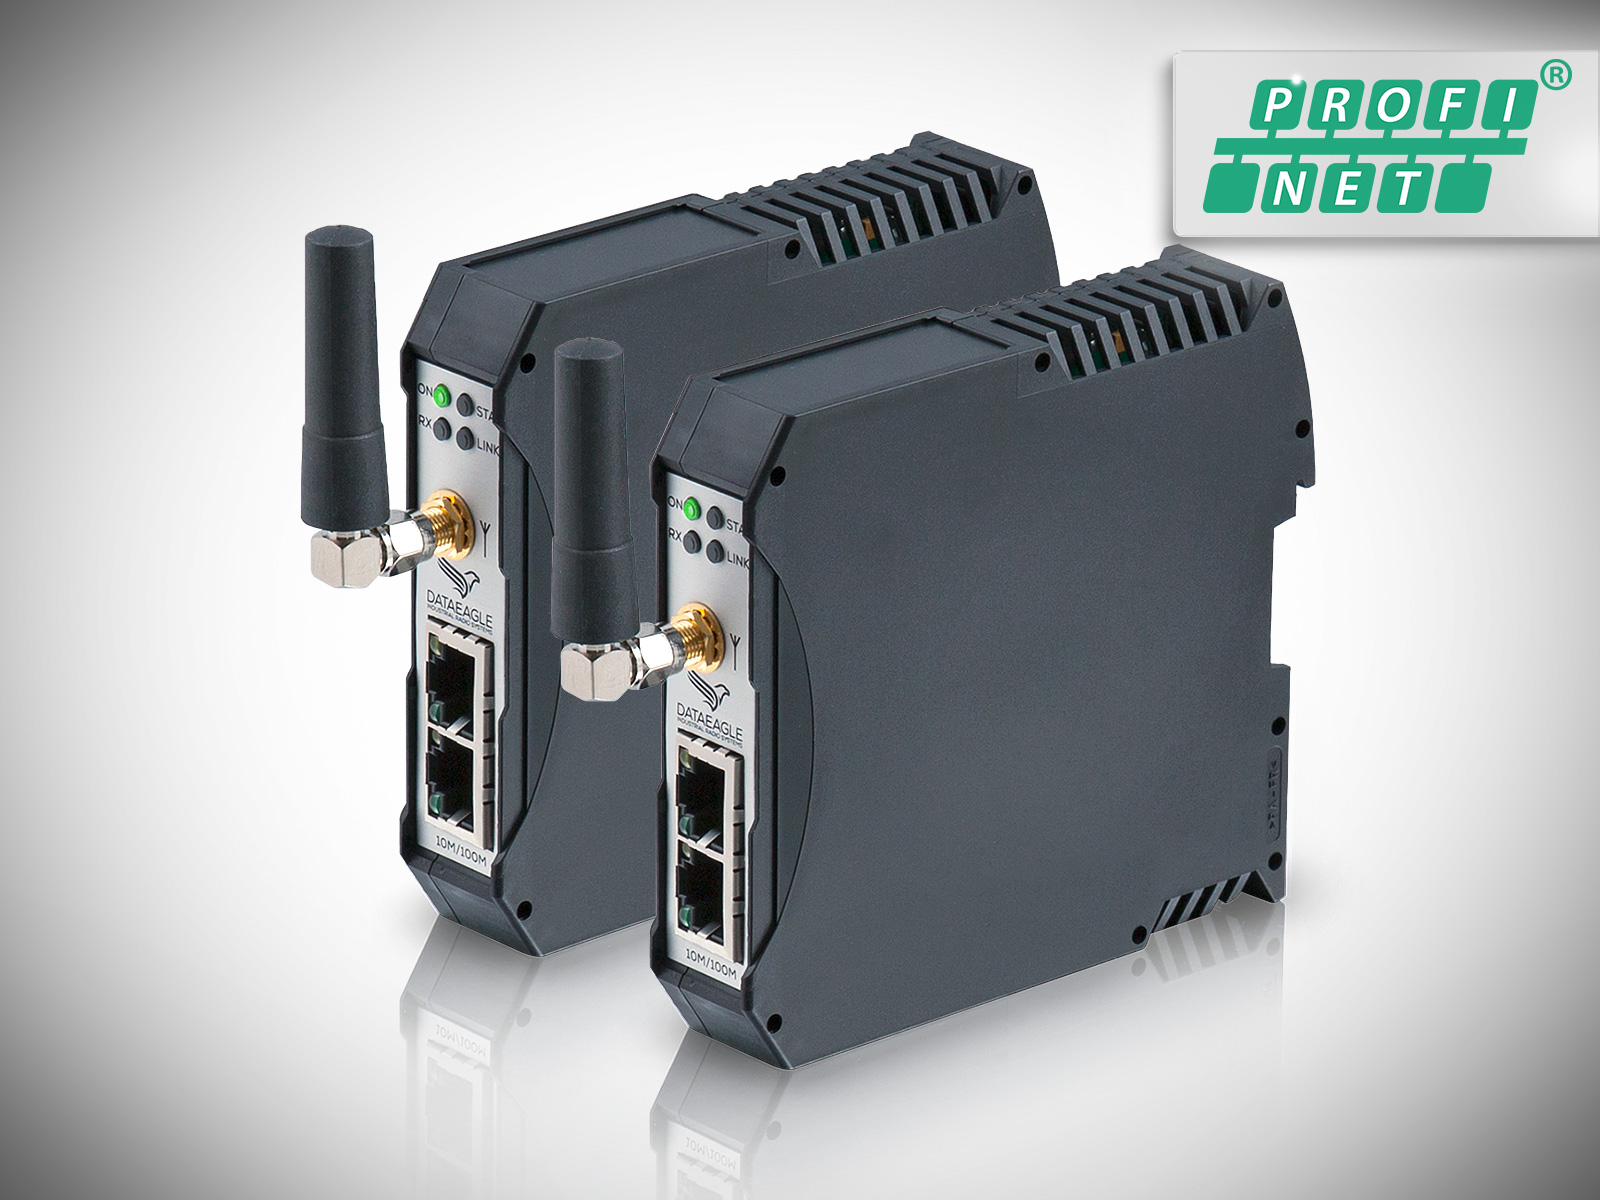 Wireless PROFINET • Our product line DATAEAGLE 4000 was developed especially for Wireless PROFINET.